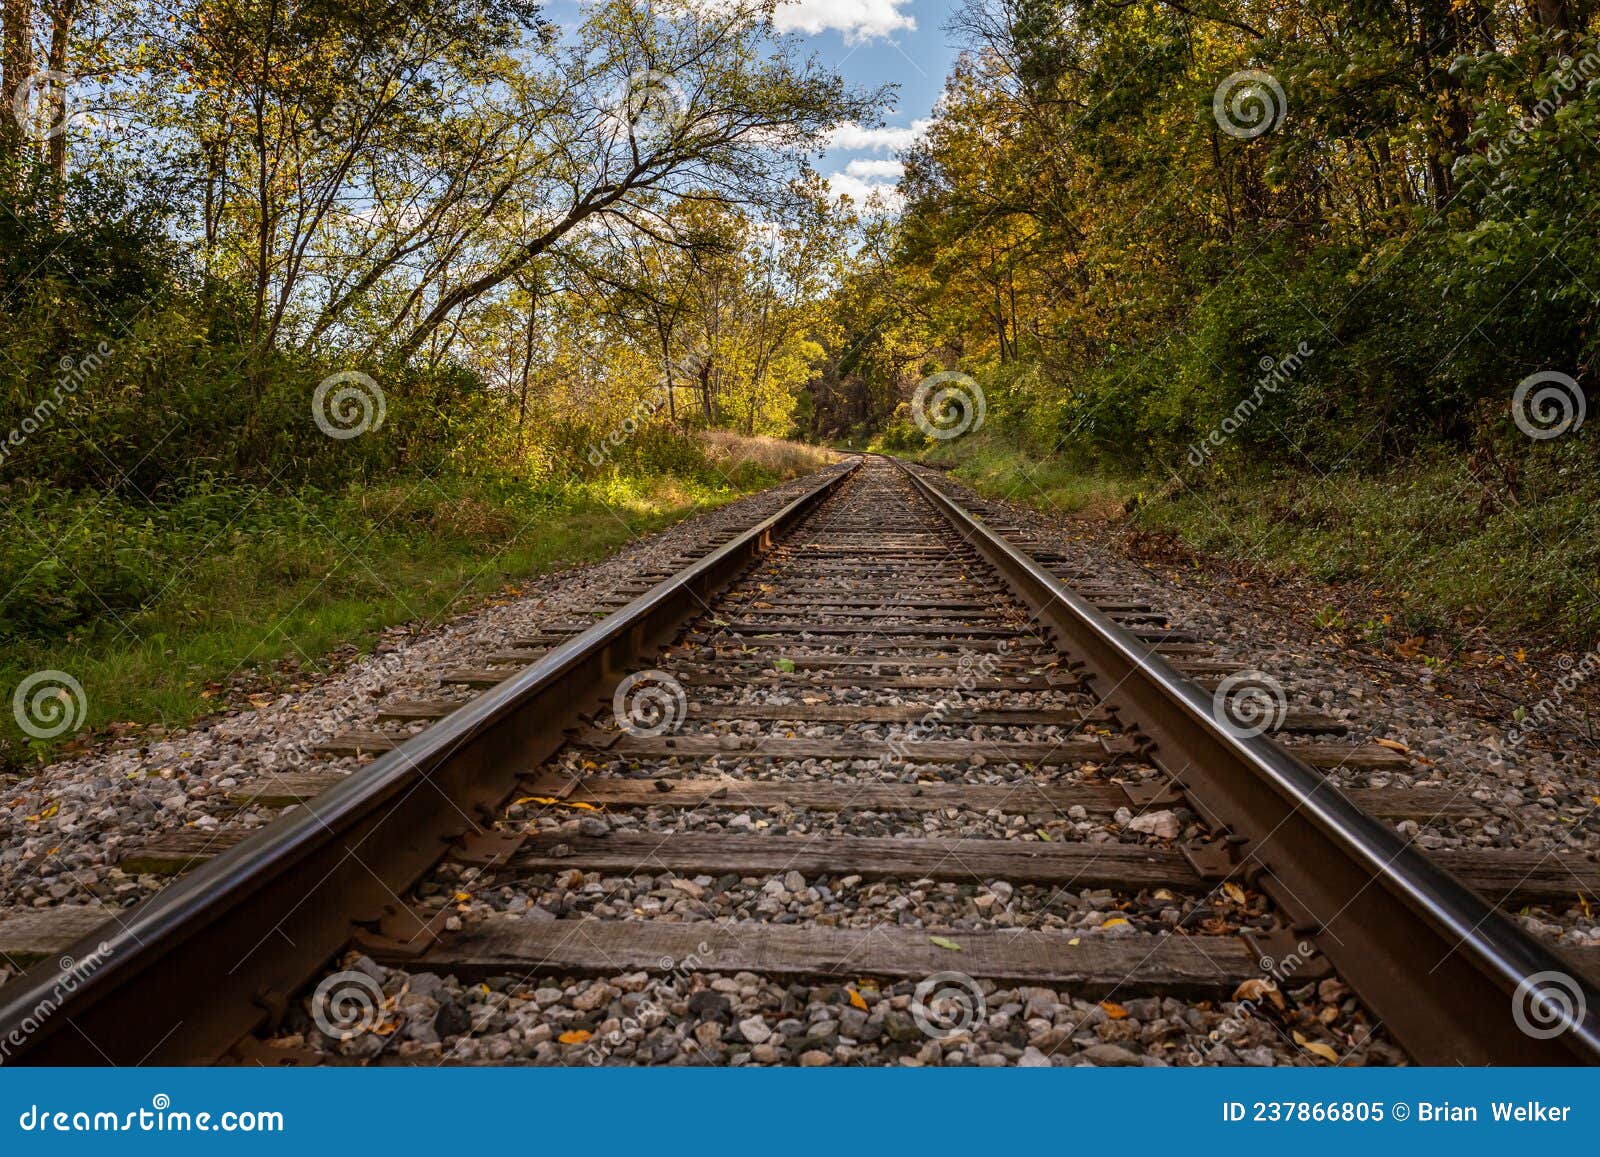 Railroad Tracks through Cuyahoga Valley Stock Image Image of akron